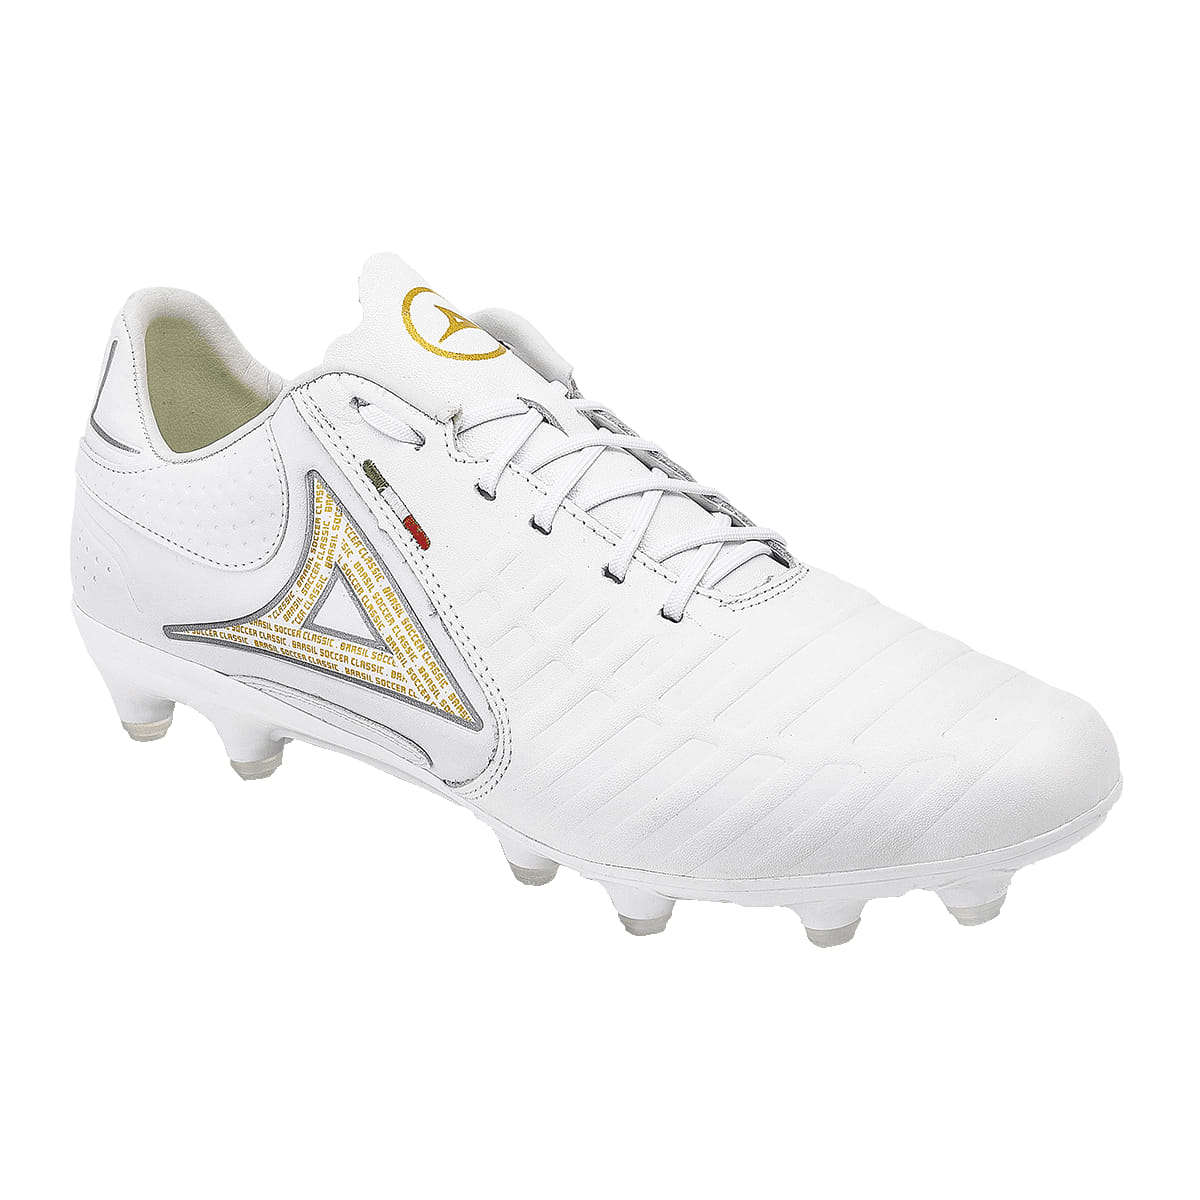 OUTLET SOCCER HOMBRE PIRMA 3042 BLANCO